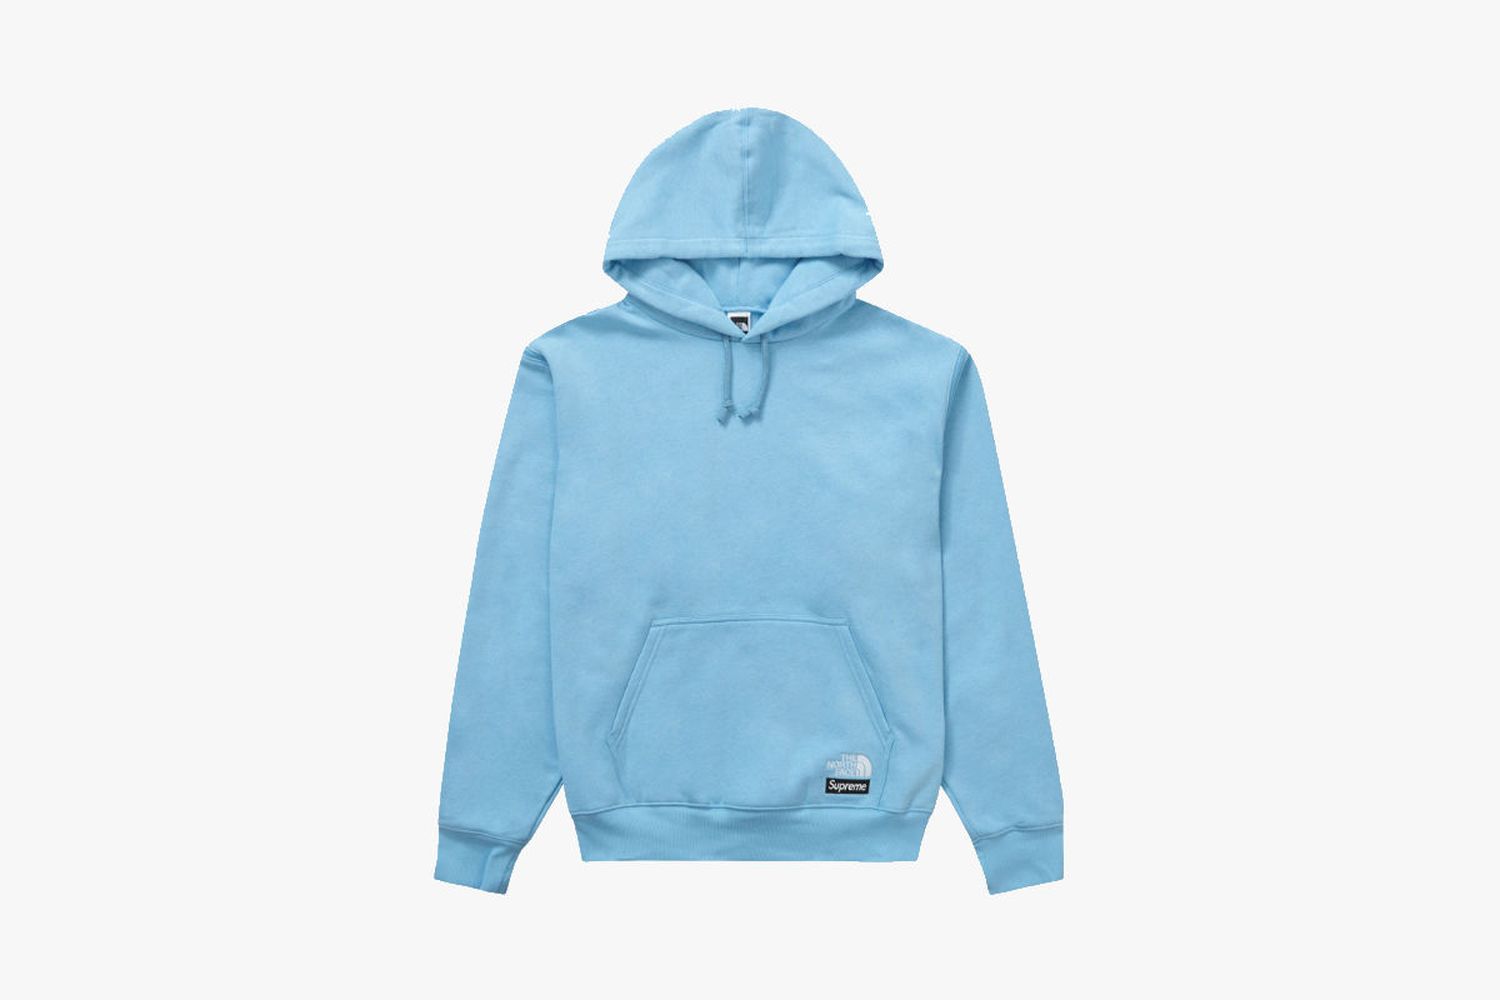 The North Face Convertible Hooded Sweatshirt